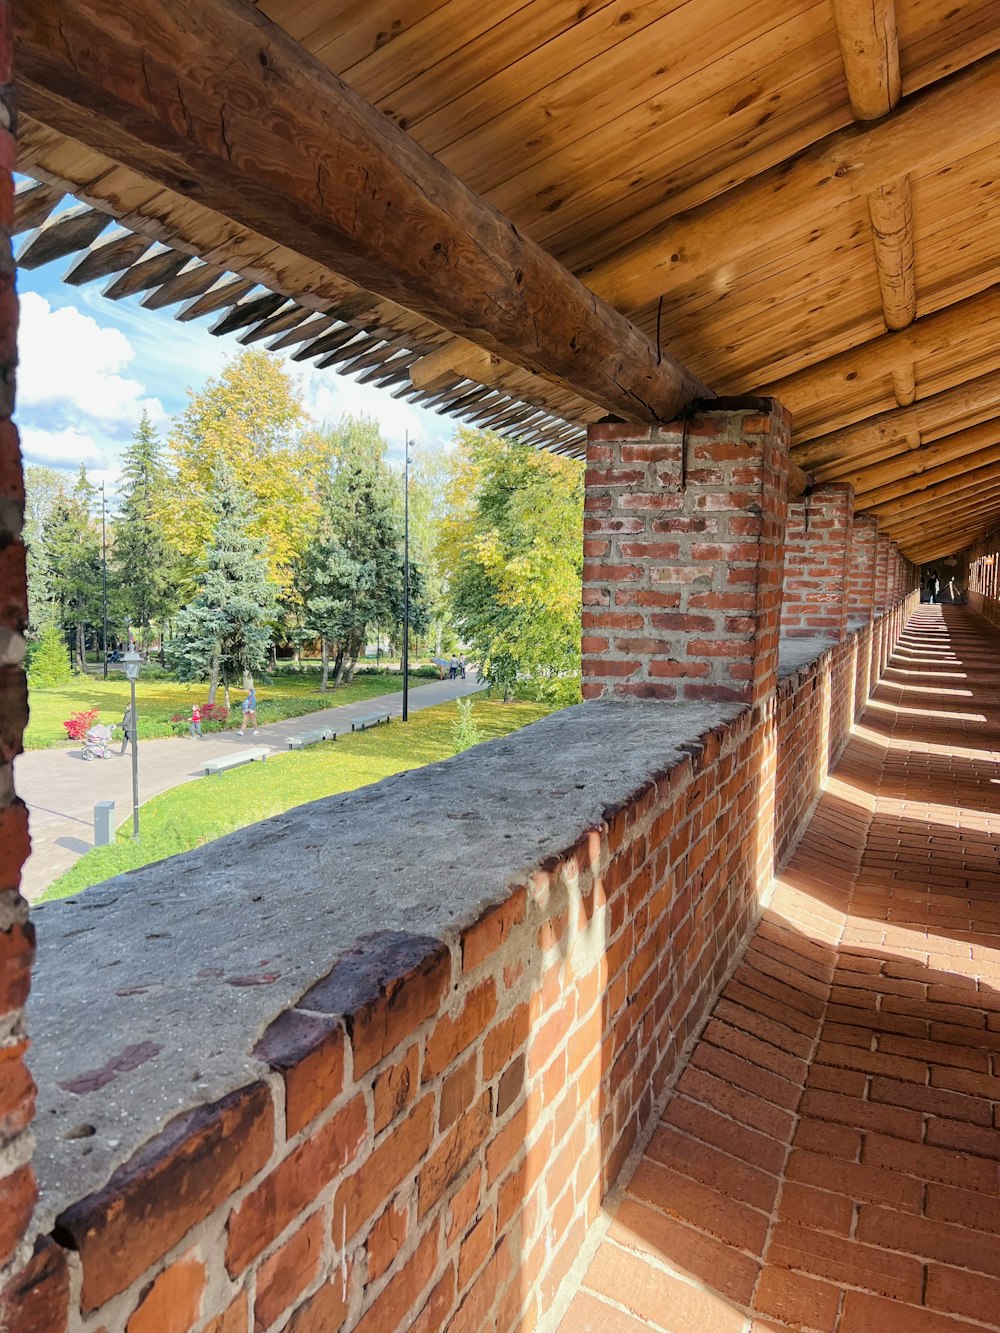 a brick wall with a brick walkway and trees in the background